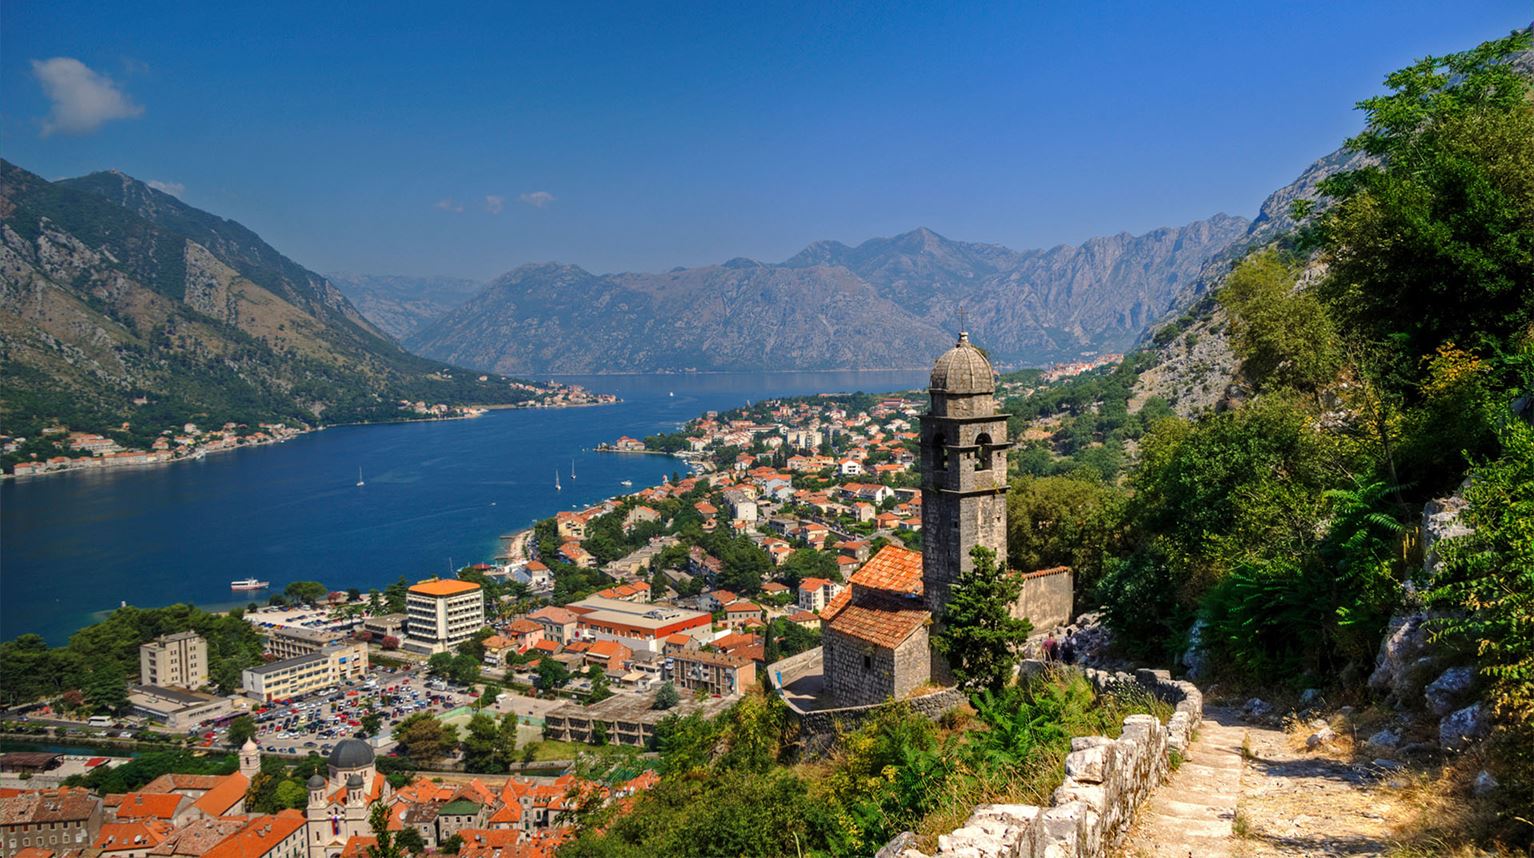 Aerial view of the Kotor Bay, Montenegro